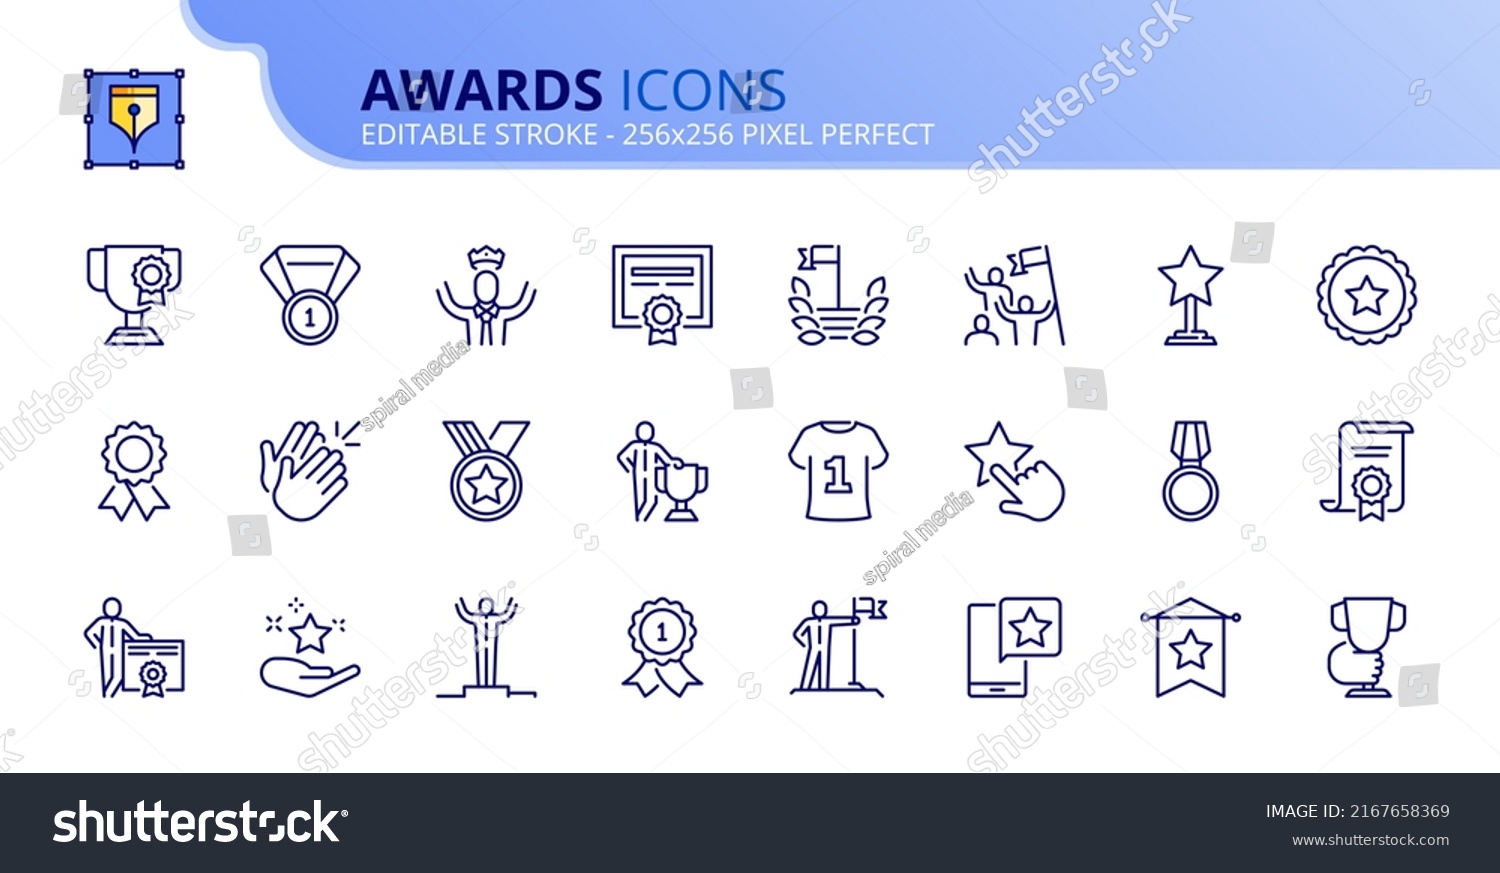 Line icons about awards and acknowledgements. Contains such icons as medal, trophy, the best, achievement, excellence and certificate. Editable stroke Vector 256x256 pixel perfect #2167658369